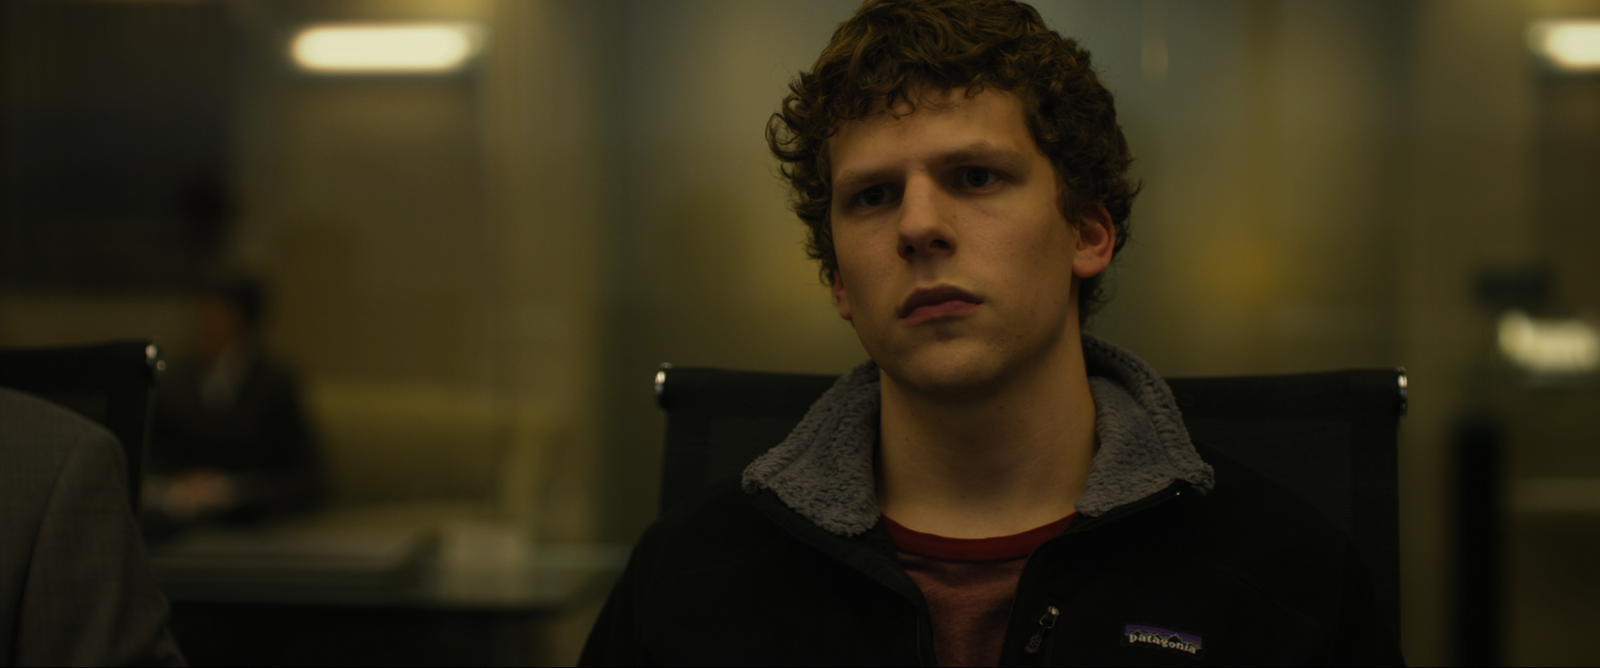 The Social Network Backgrounds, Compatible - PC, Mobile, Gadgets| 1600x668 px